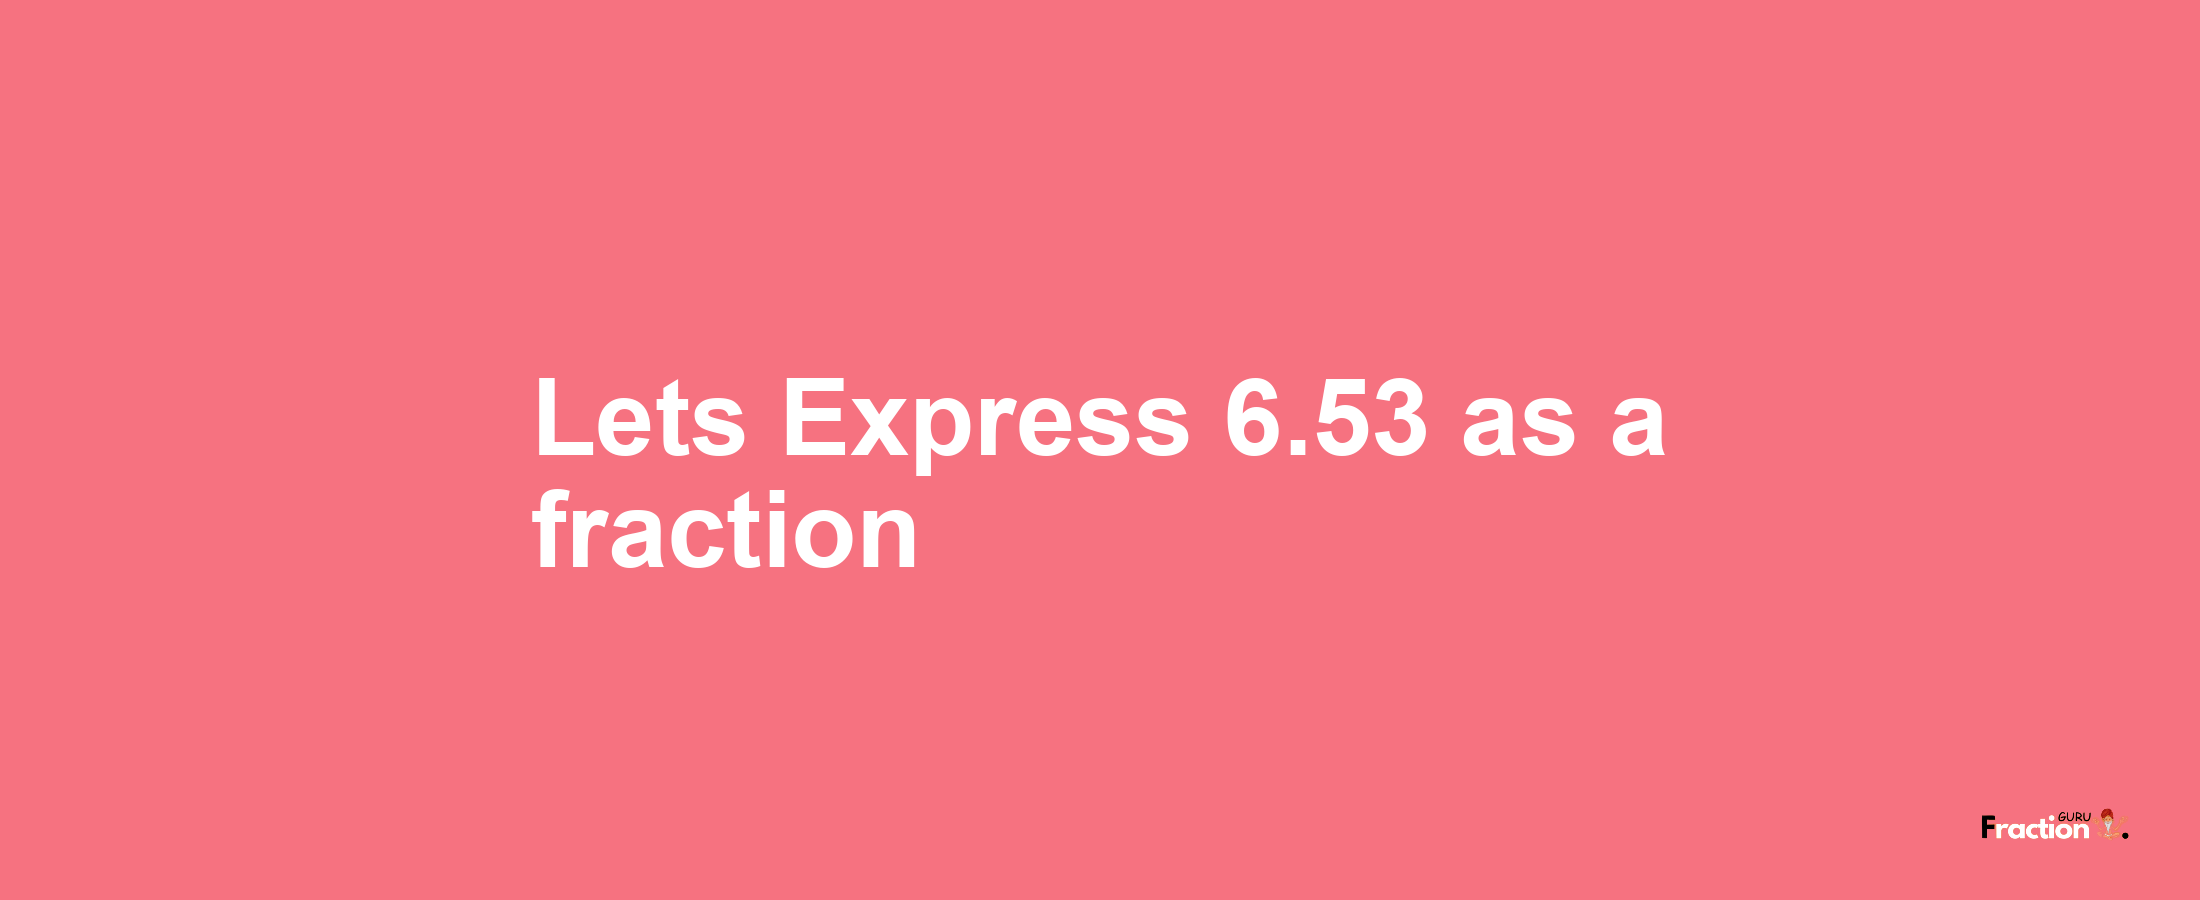 Lets Express 6.53 as afraction